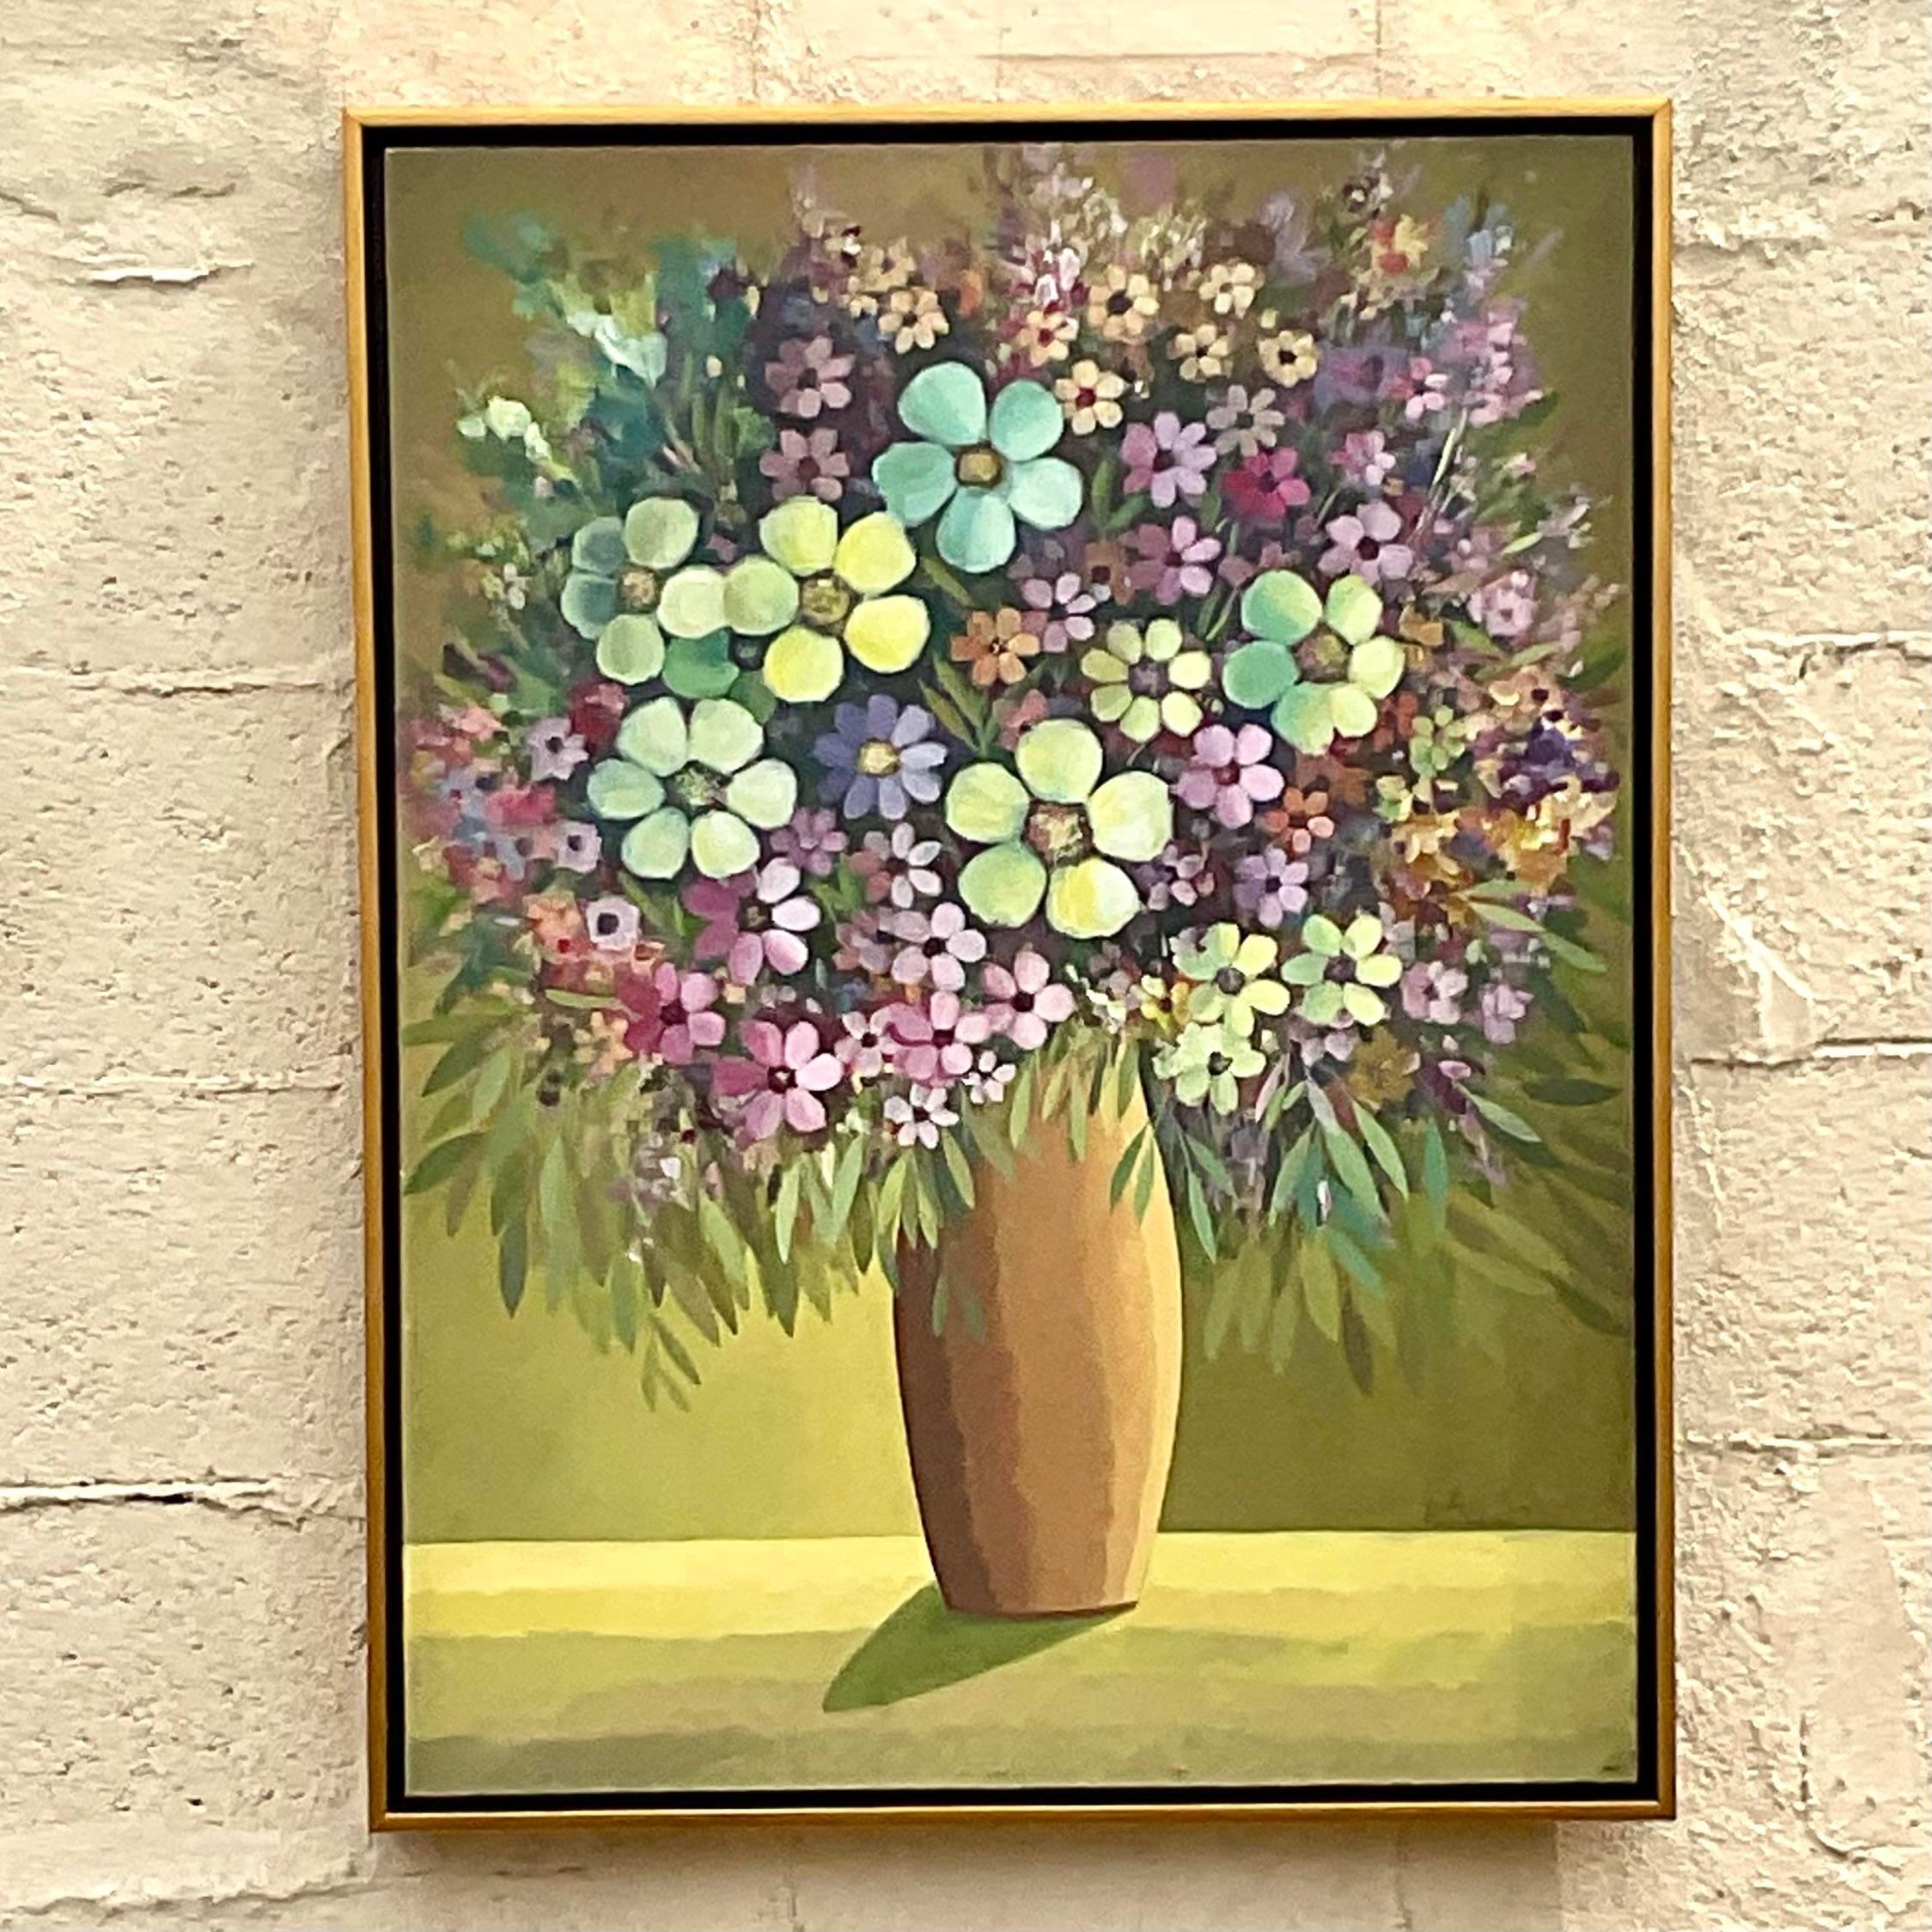 An extraordinary vintage original oil painting on canvas. A brilliant floral composition with a distinctive style. Signed by the artist. Newly framed. Acquired from a Palm Beach estate.